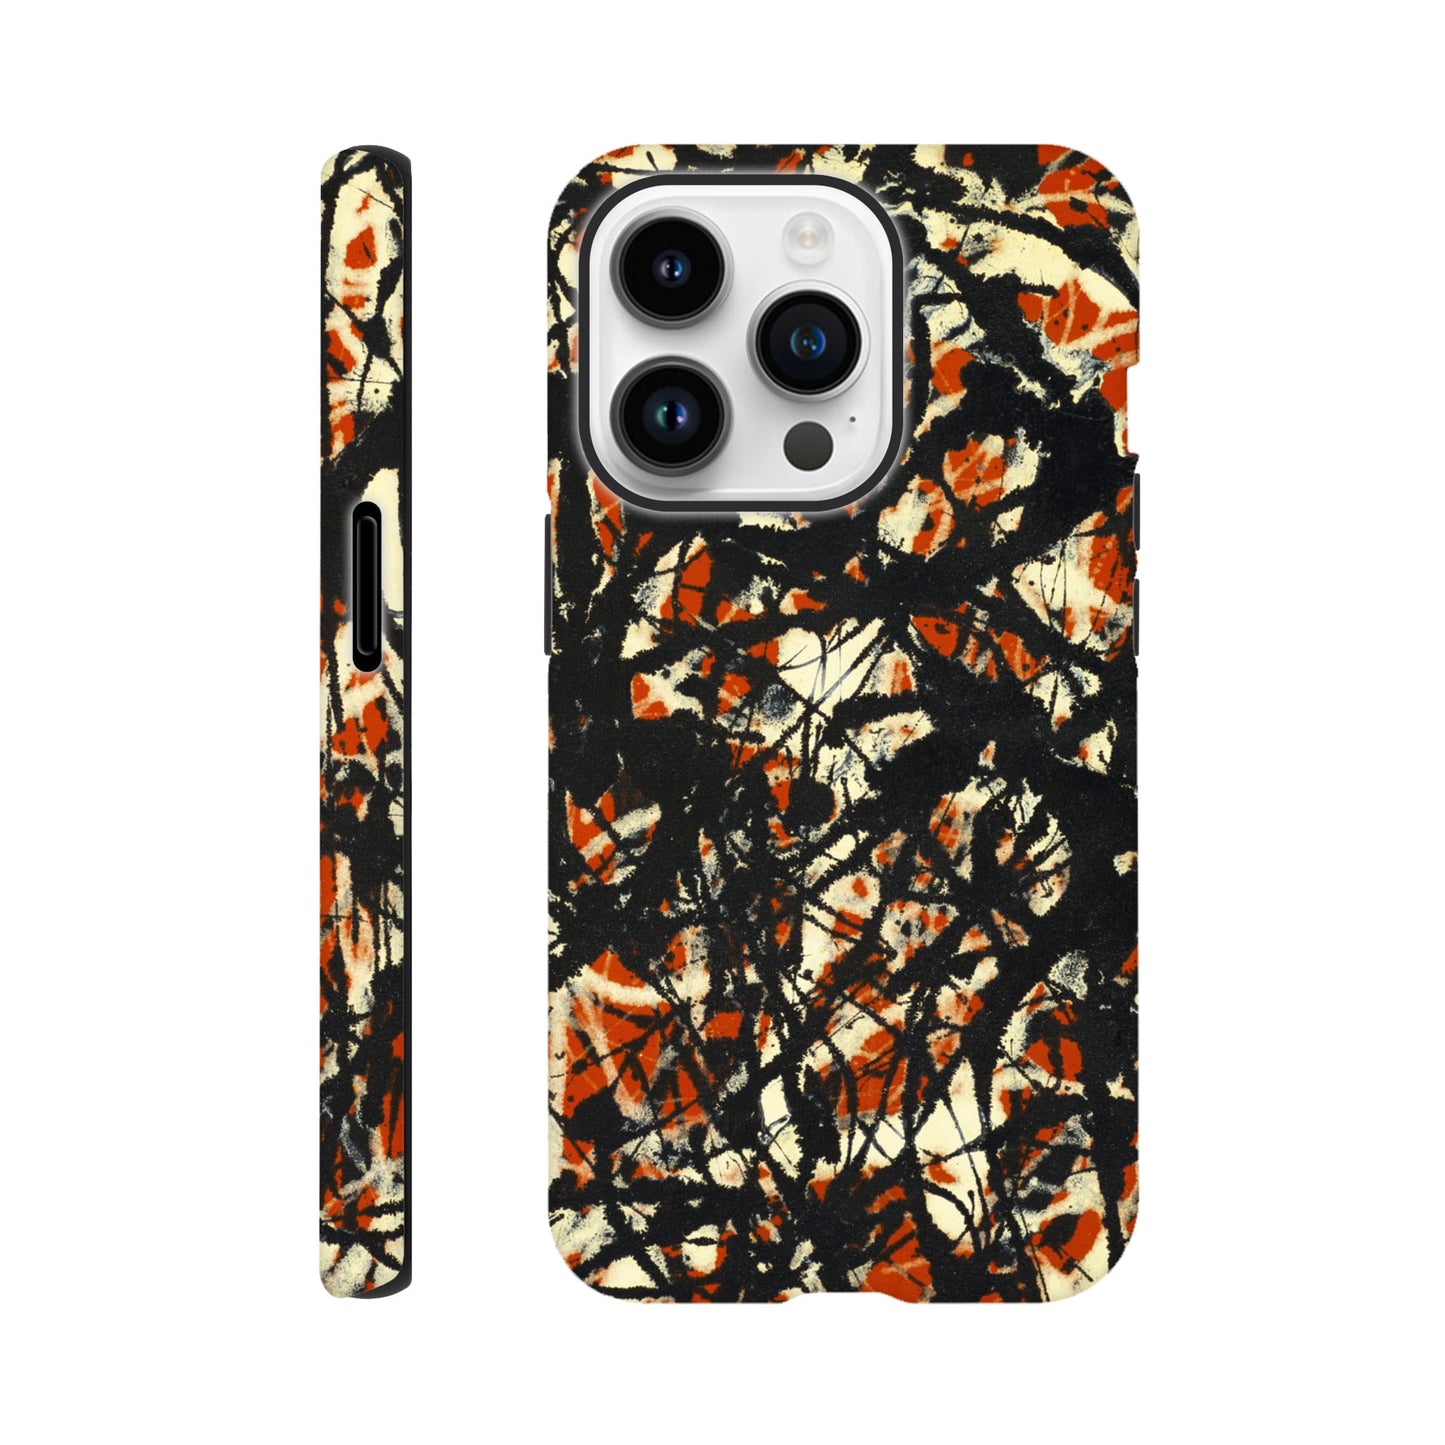 a phone case with an orange and black design